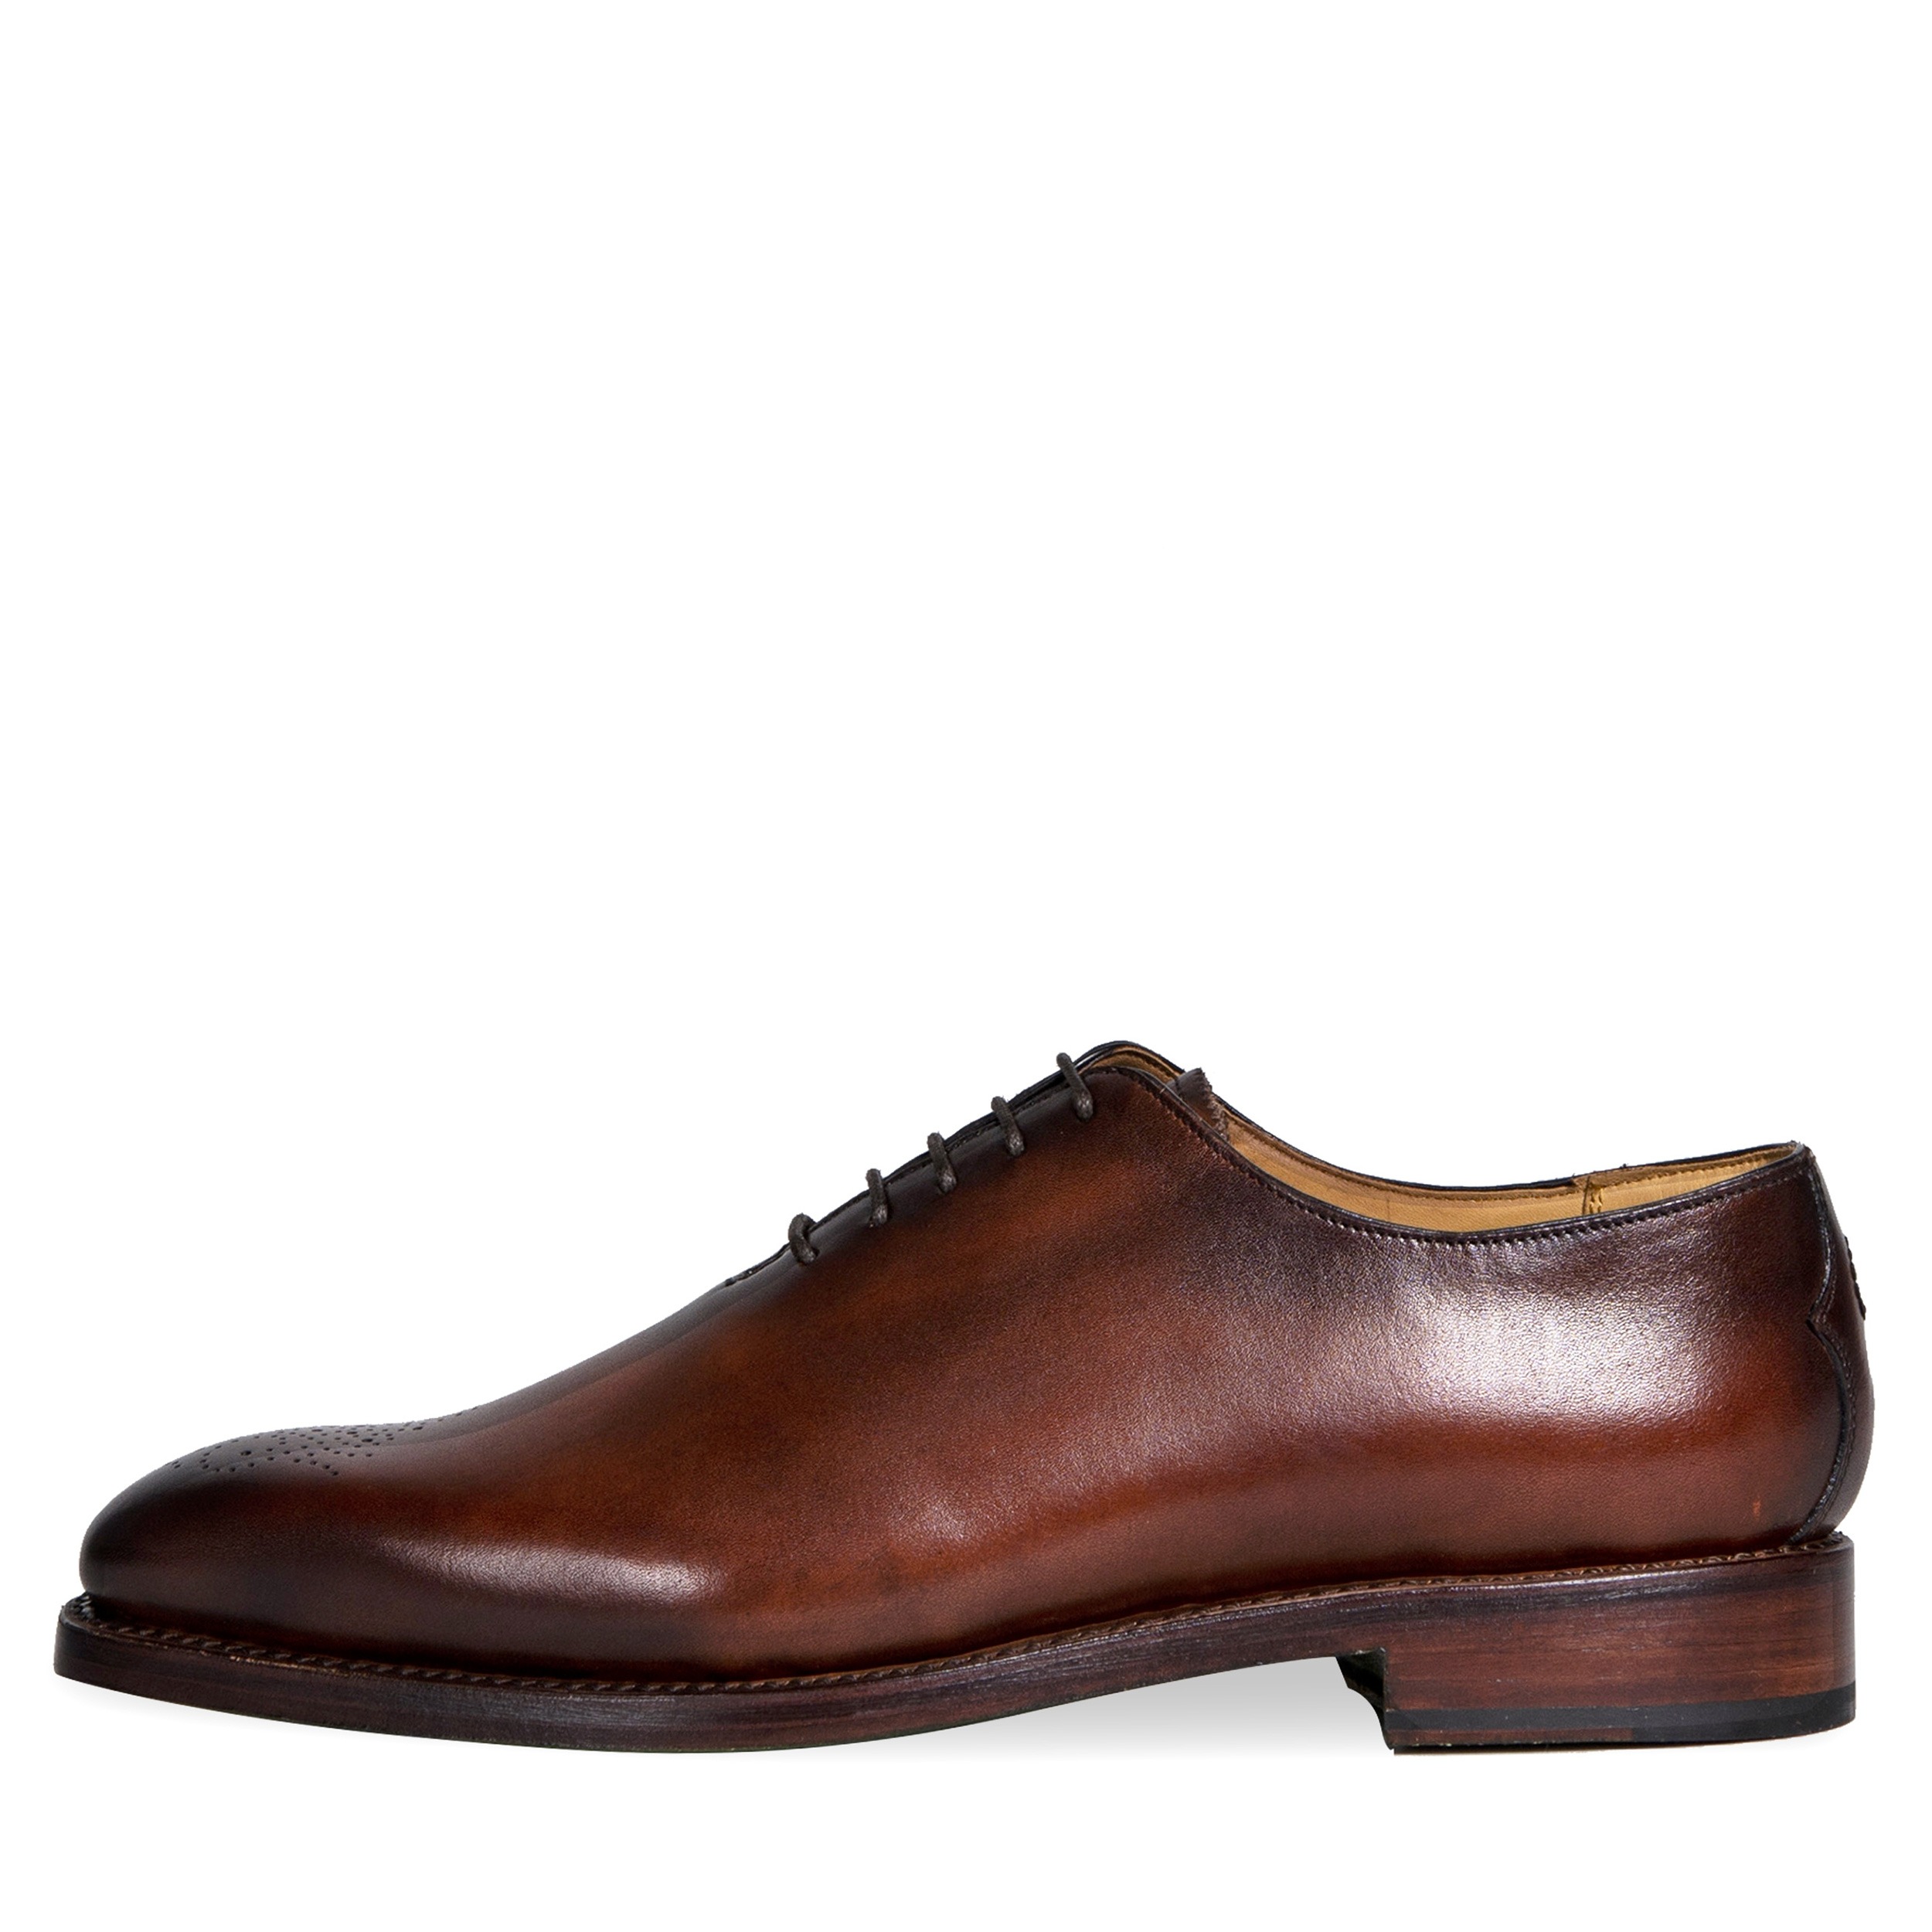 Oliver Sweeney ’Yarford’ Leather Shoe Cognac